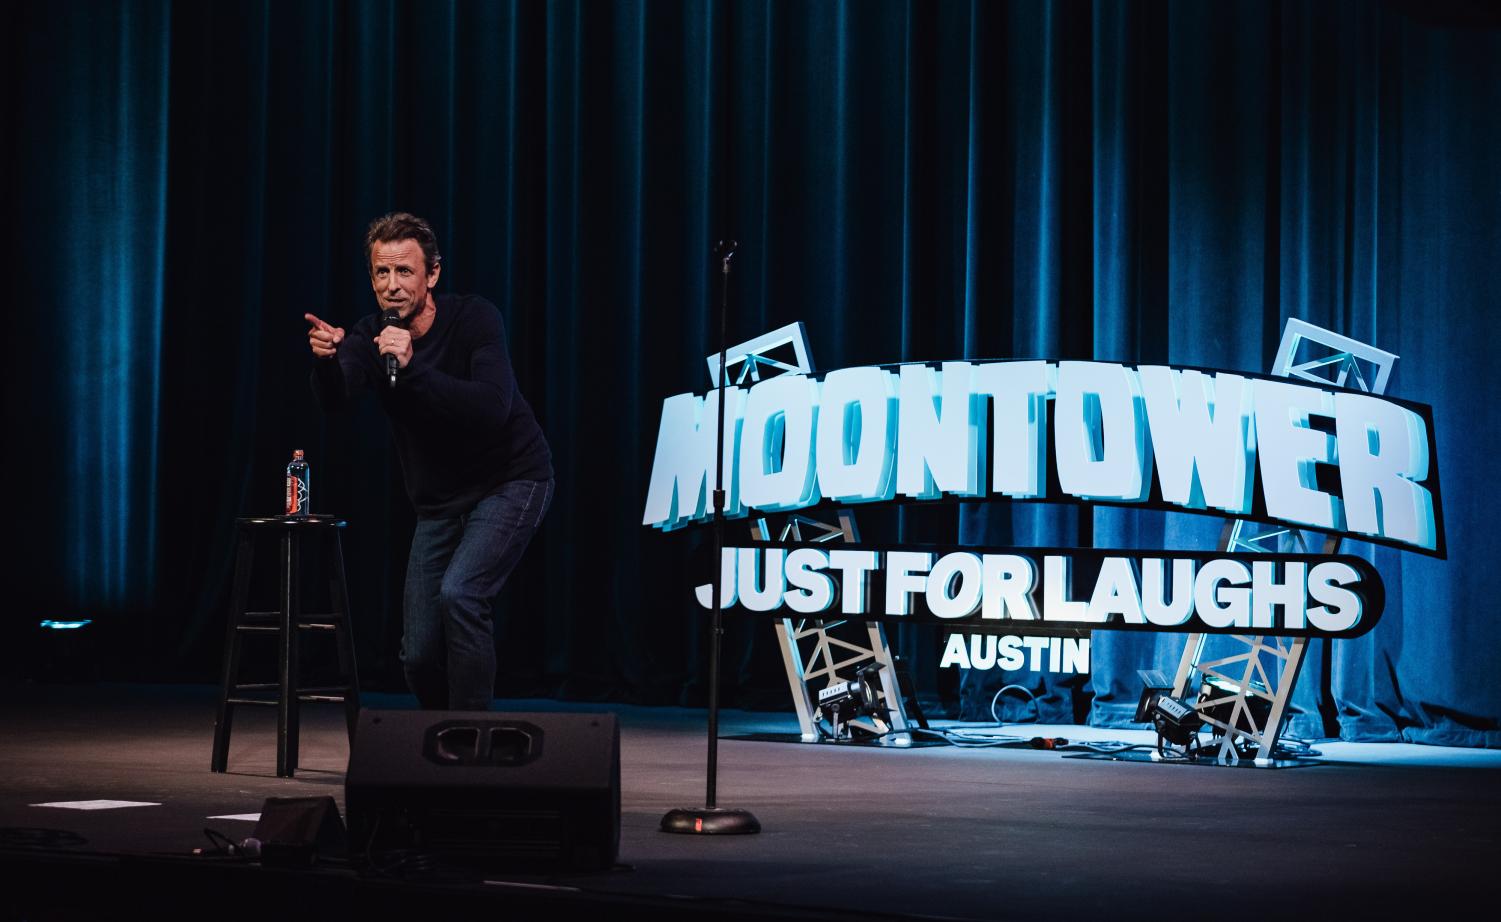 Moontower Just for Laughs Comedy Festival mixes legends with rising